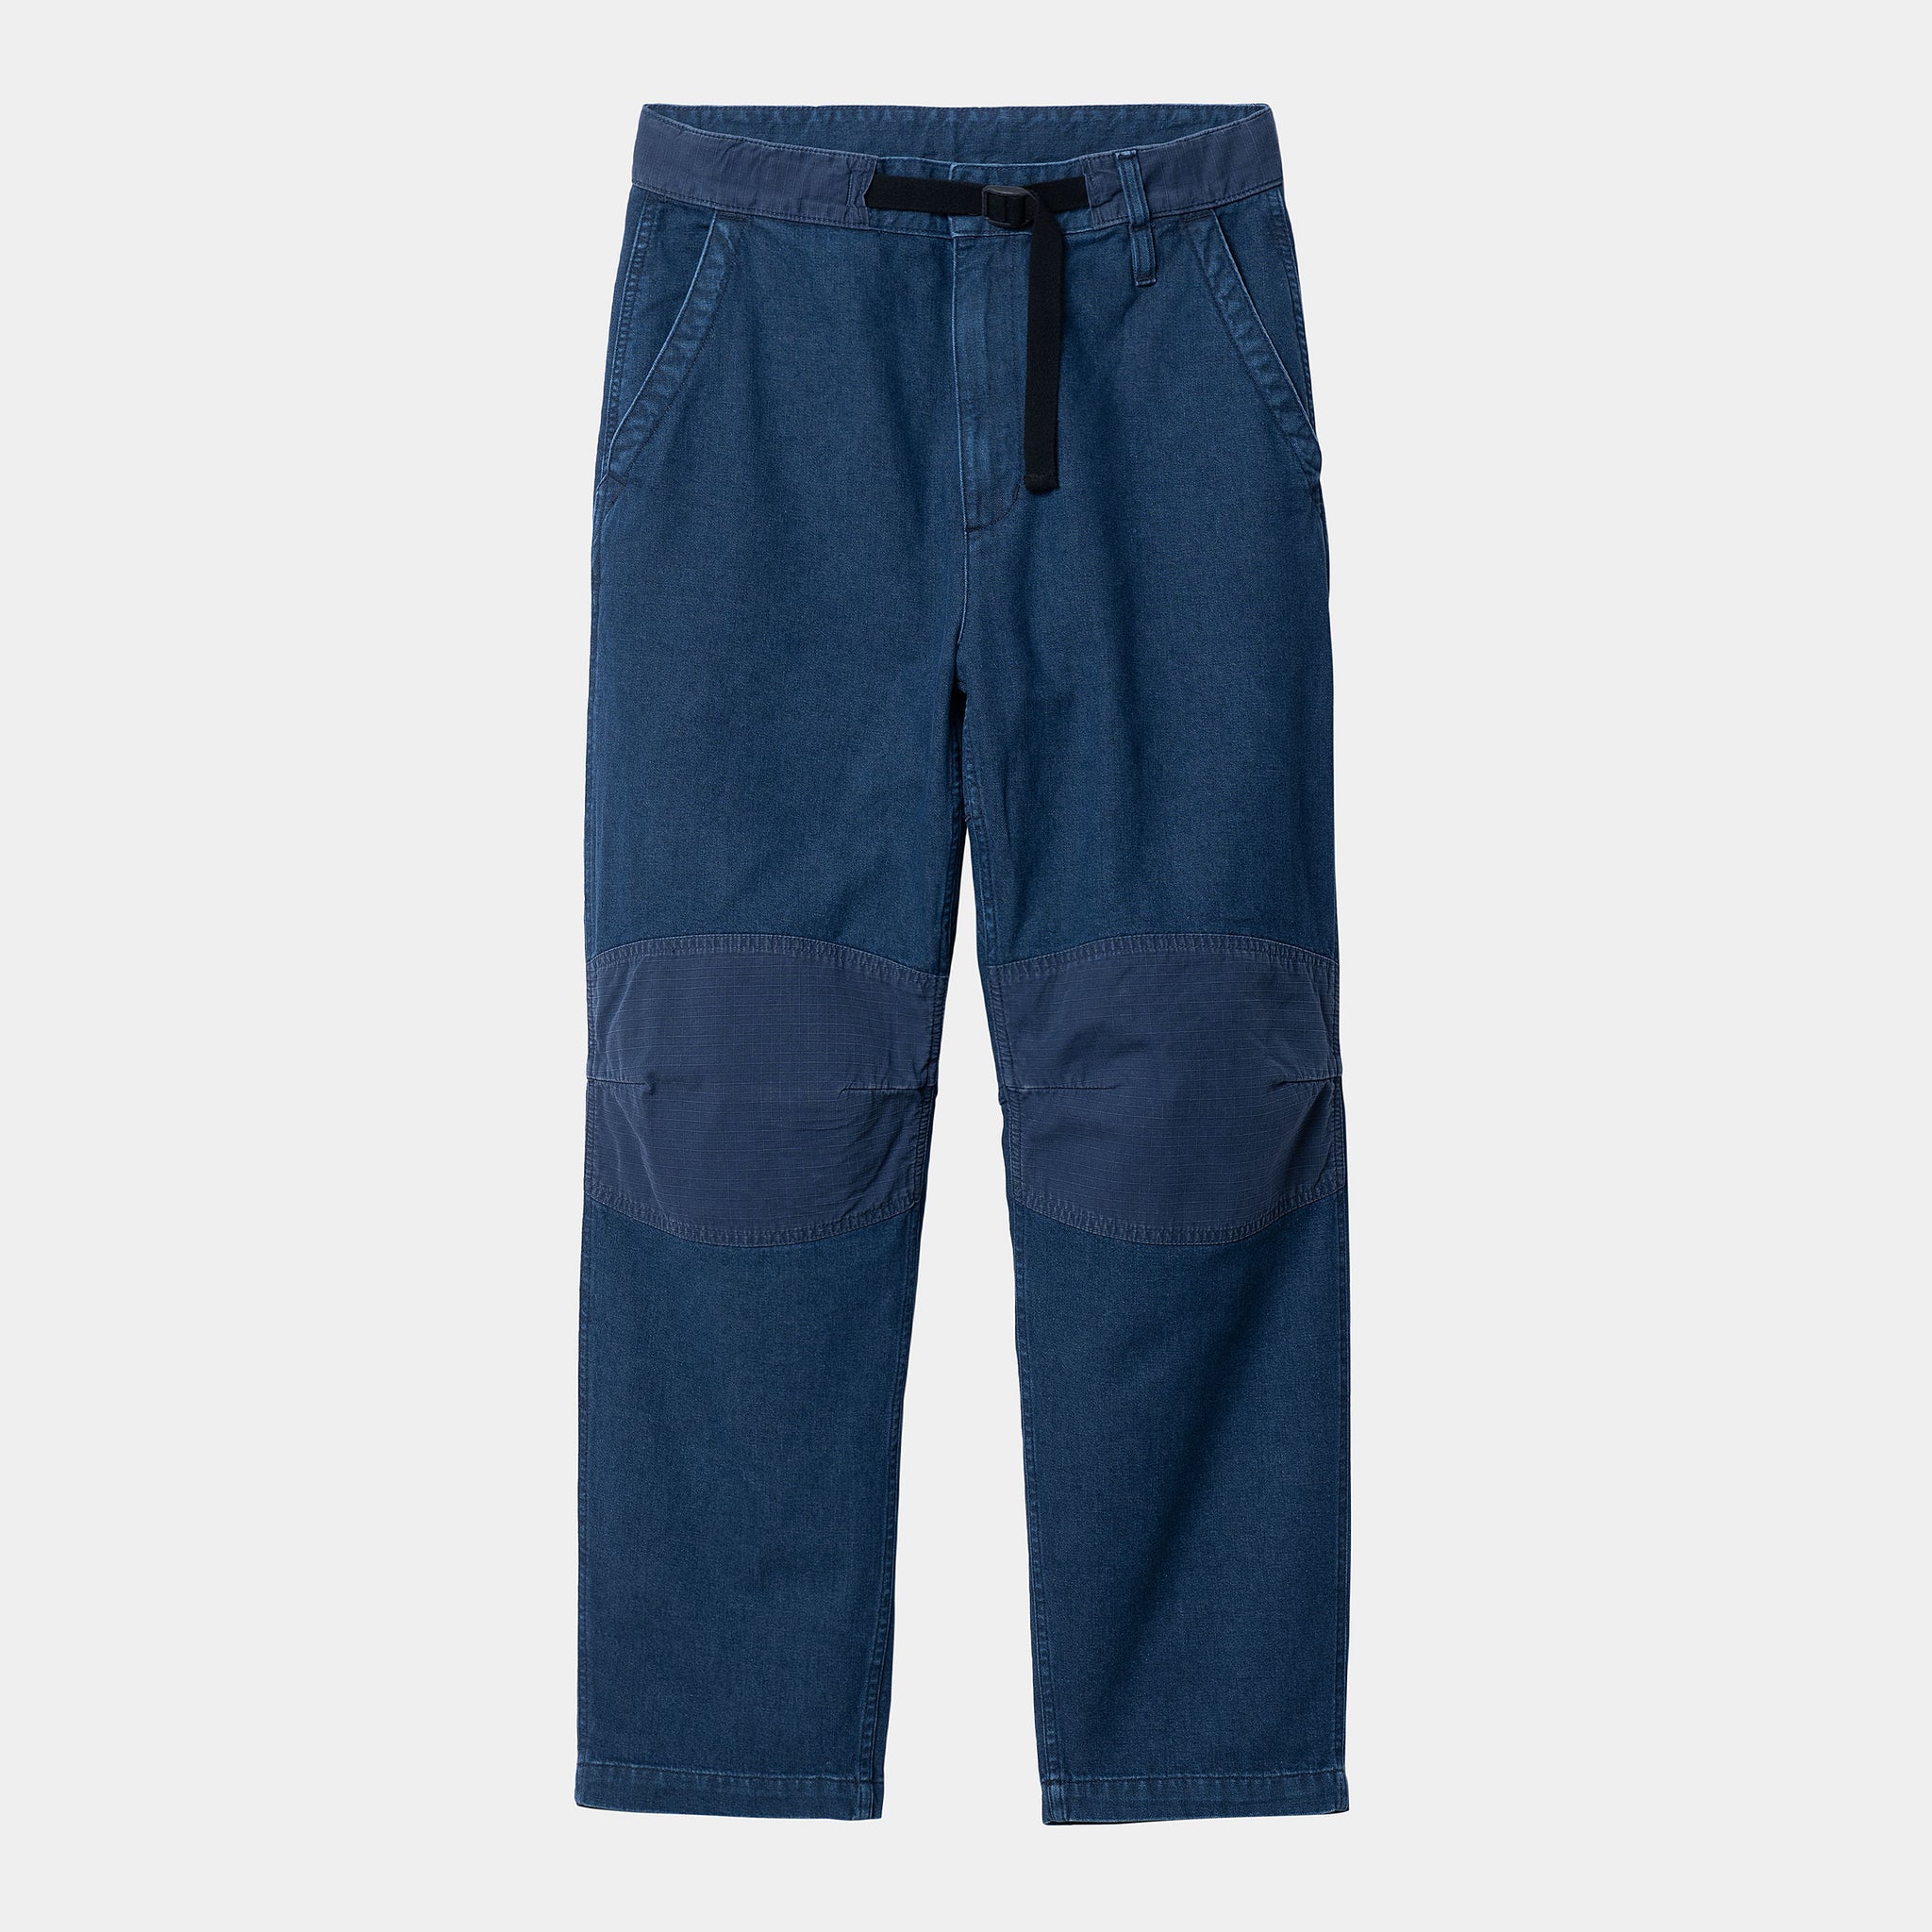 Alma Pant Cotton Perry Denim (Blue stone washed)